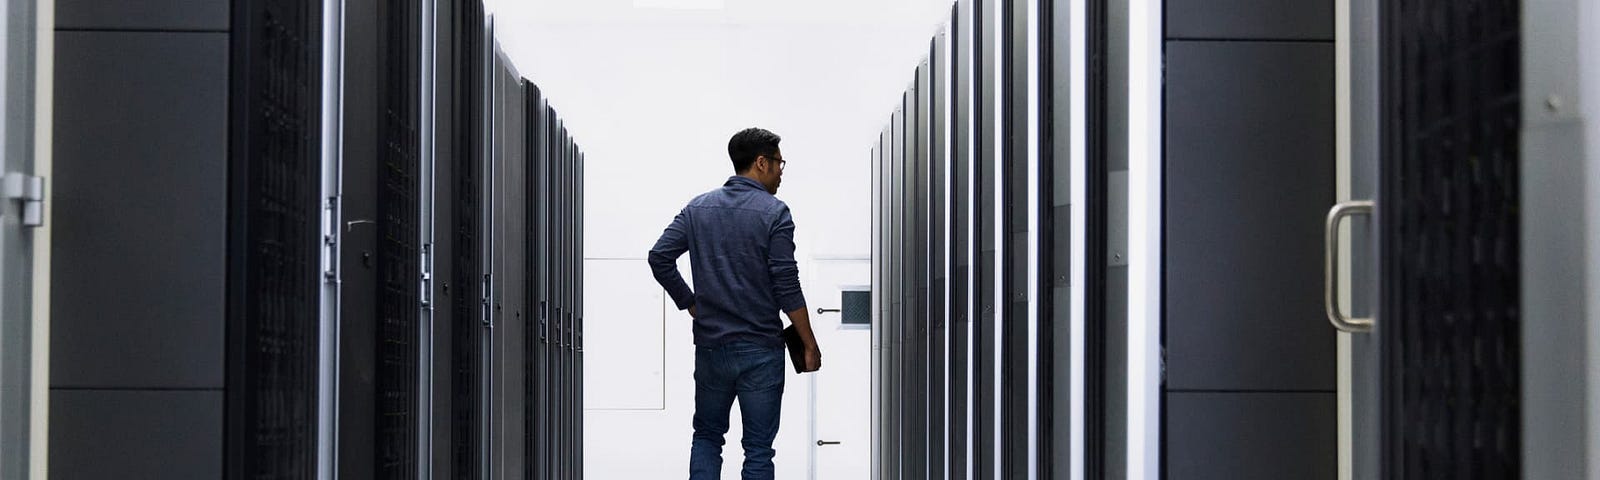 Person in a server room